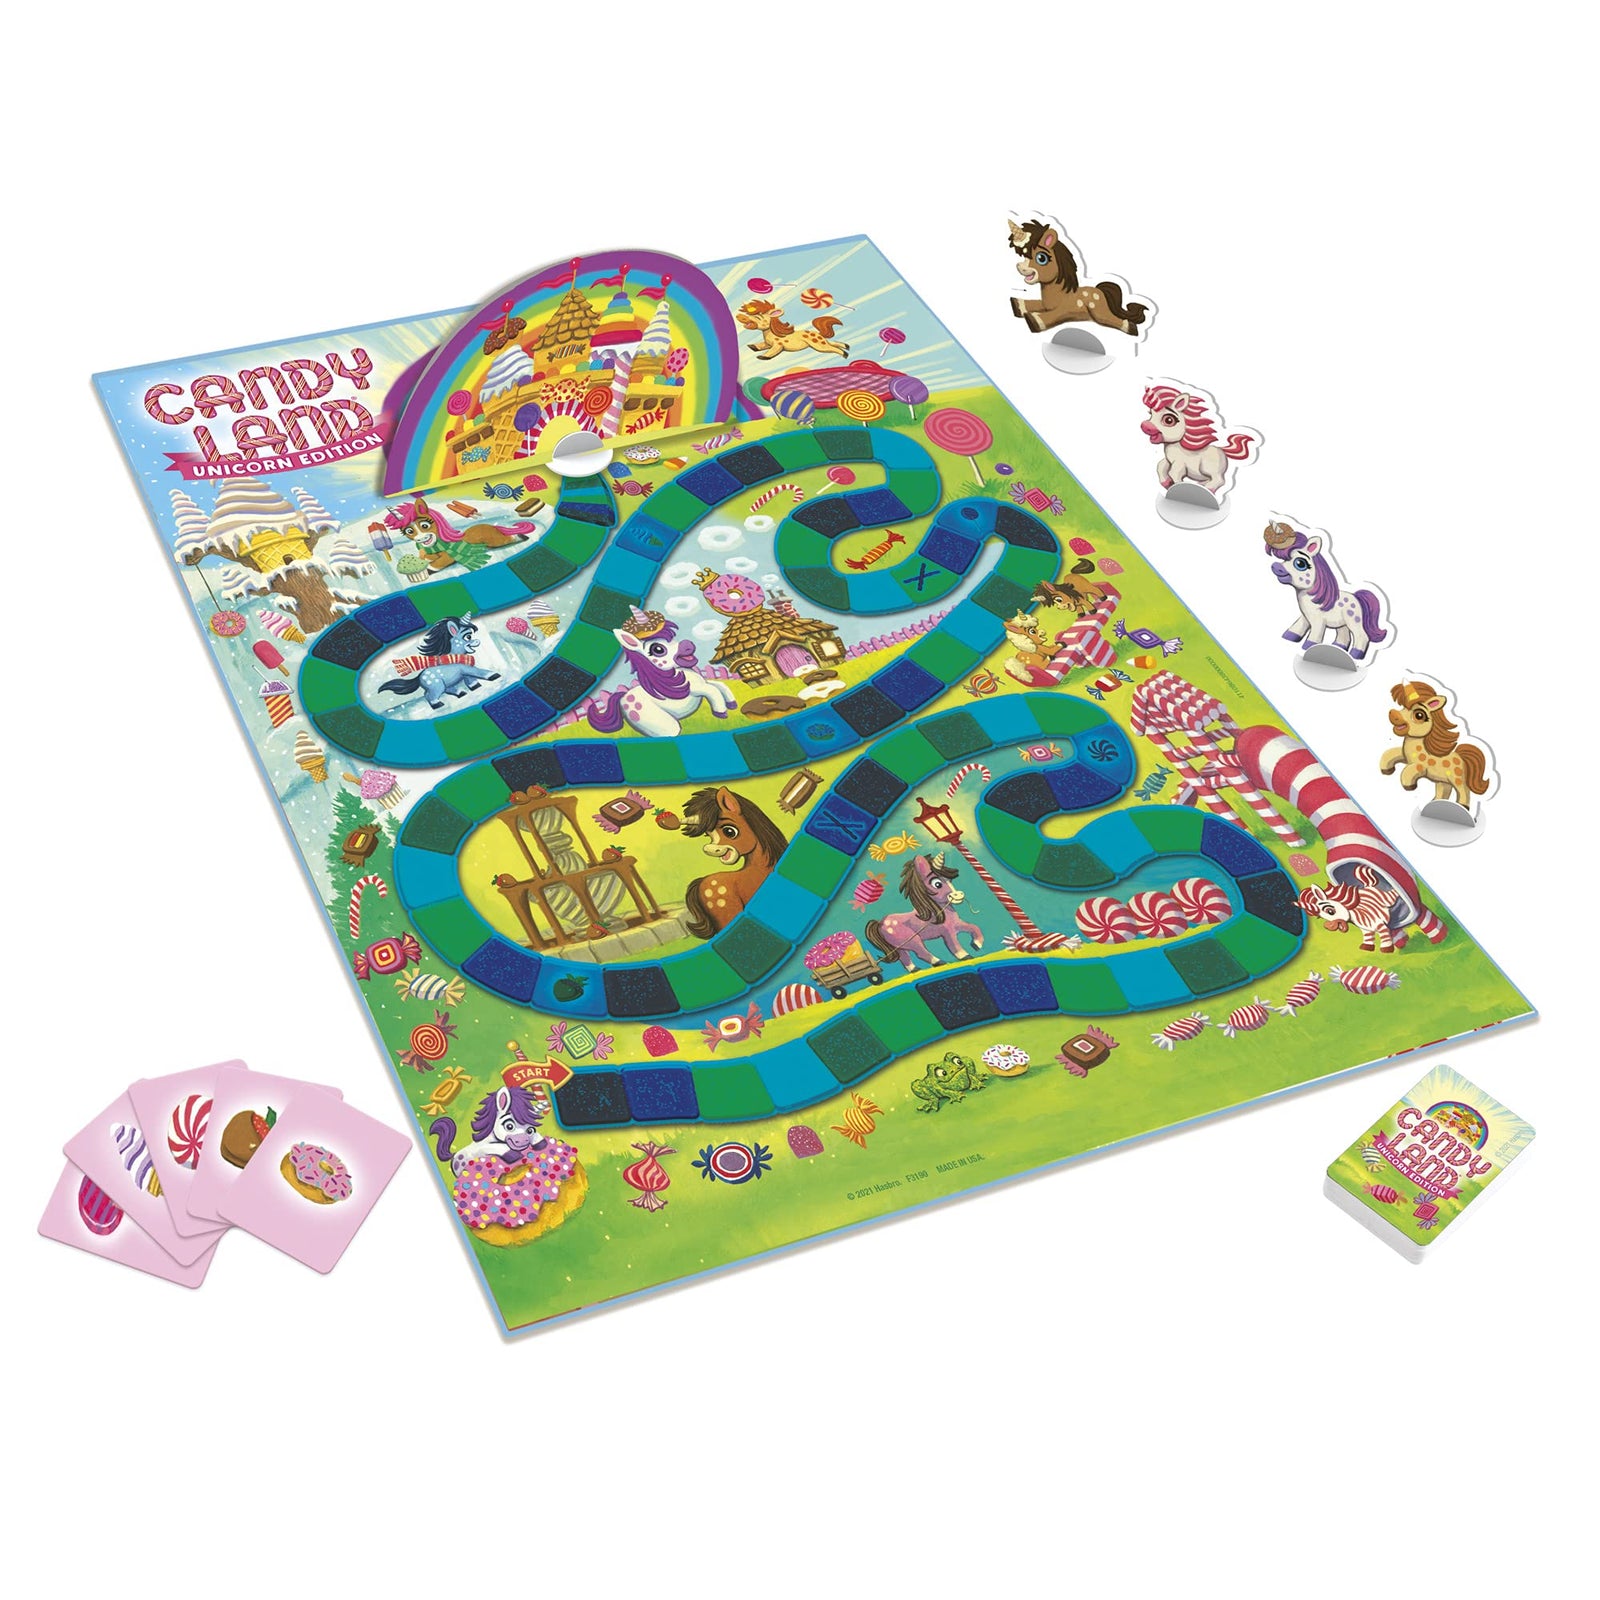 Candy Land Unicorn Edition Board Game, Preschool Game, No Reading Required Game for Young Children, Fun Game for Kids Ages 3 and Up (Amazon Exclusive)